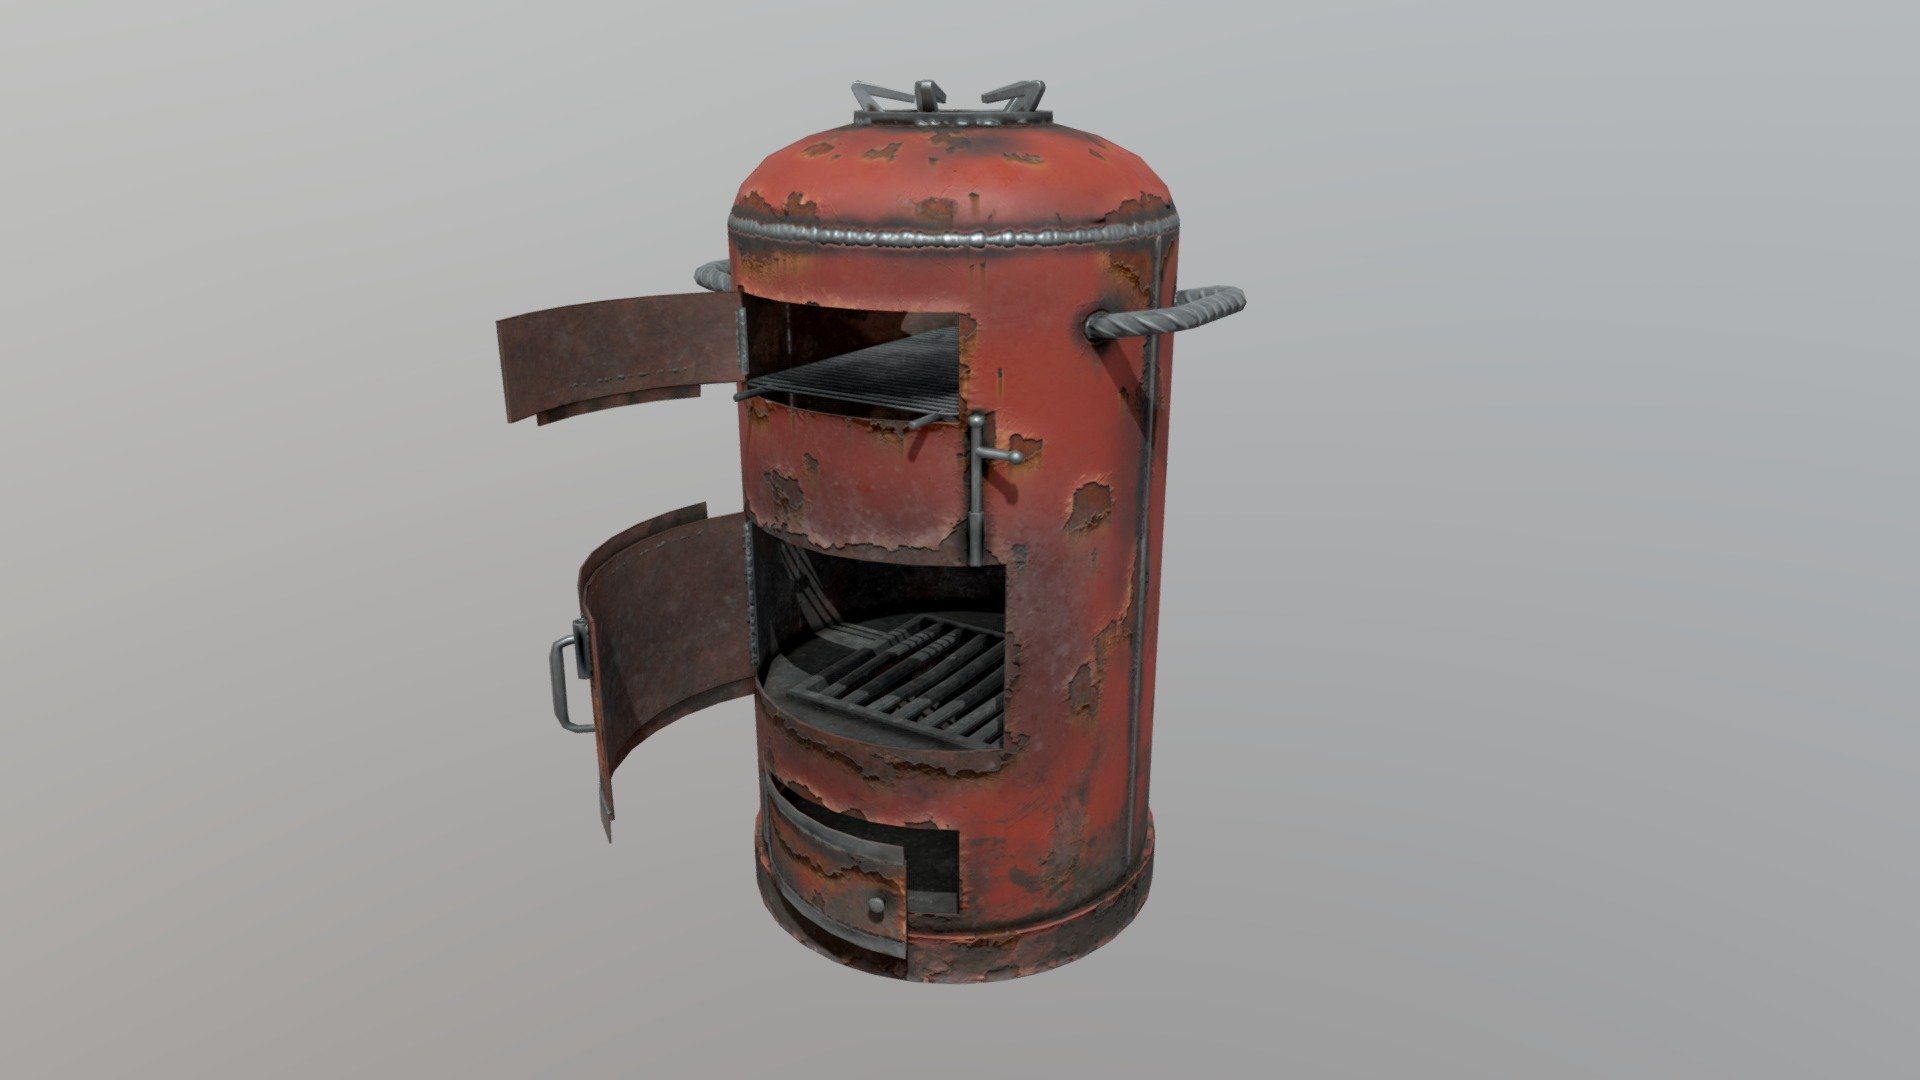 A little prop, that i made for DAYZ community roleplay-server, based on the game STALKER. Fully implemented ingame, using official modding tools (DAYZ Tools) - Propan oven - 3D model by basilus (@real-VeJet) 3d model